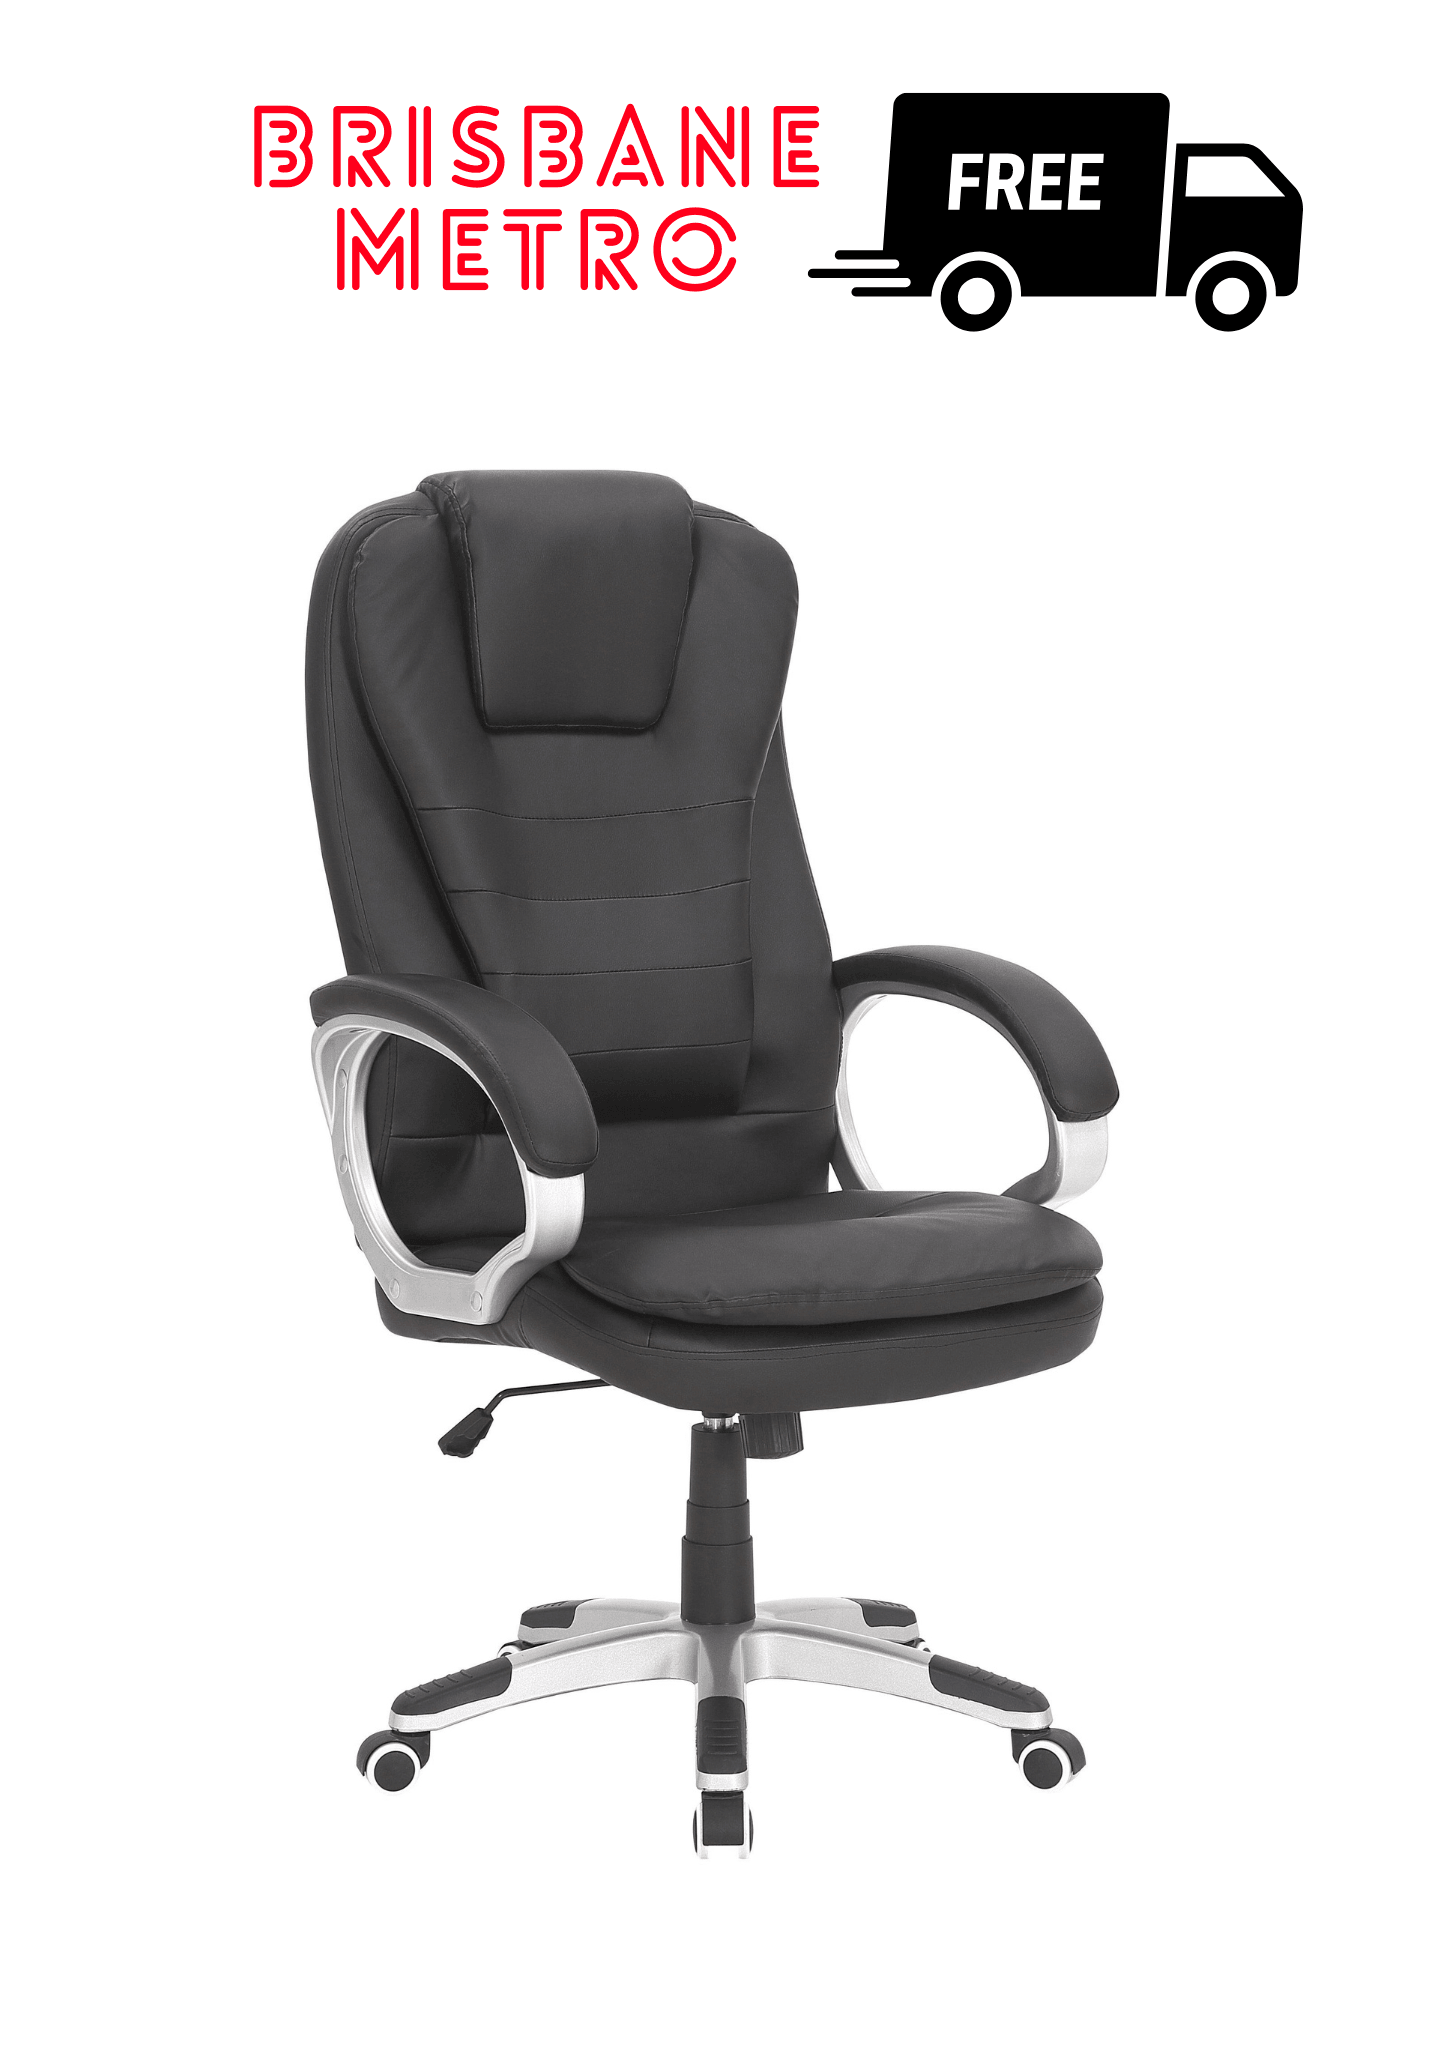 Black PU leather office chair with chrome base, swivel, and adjustable height features.